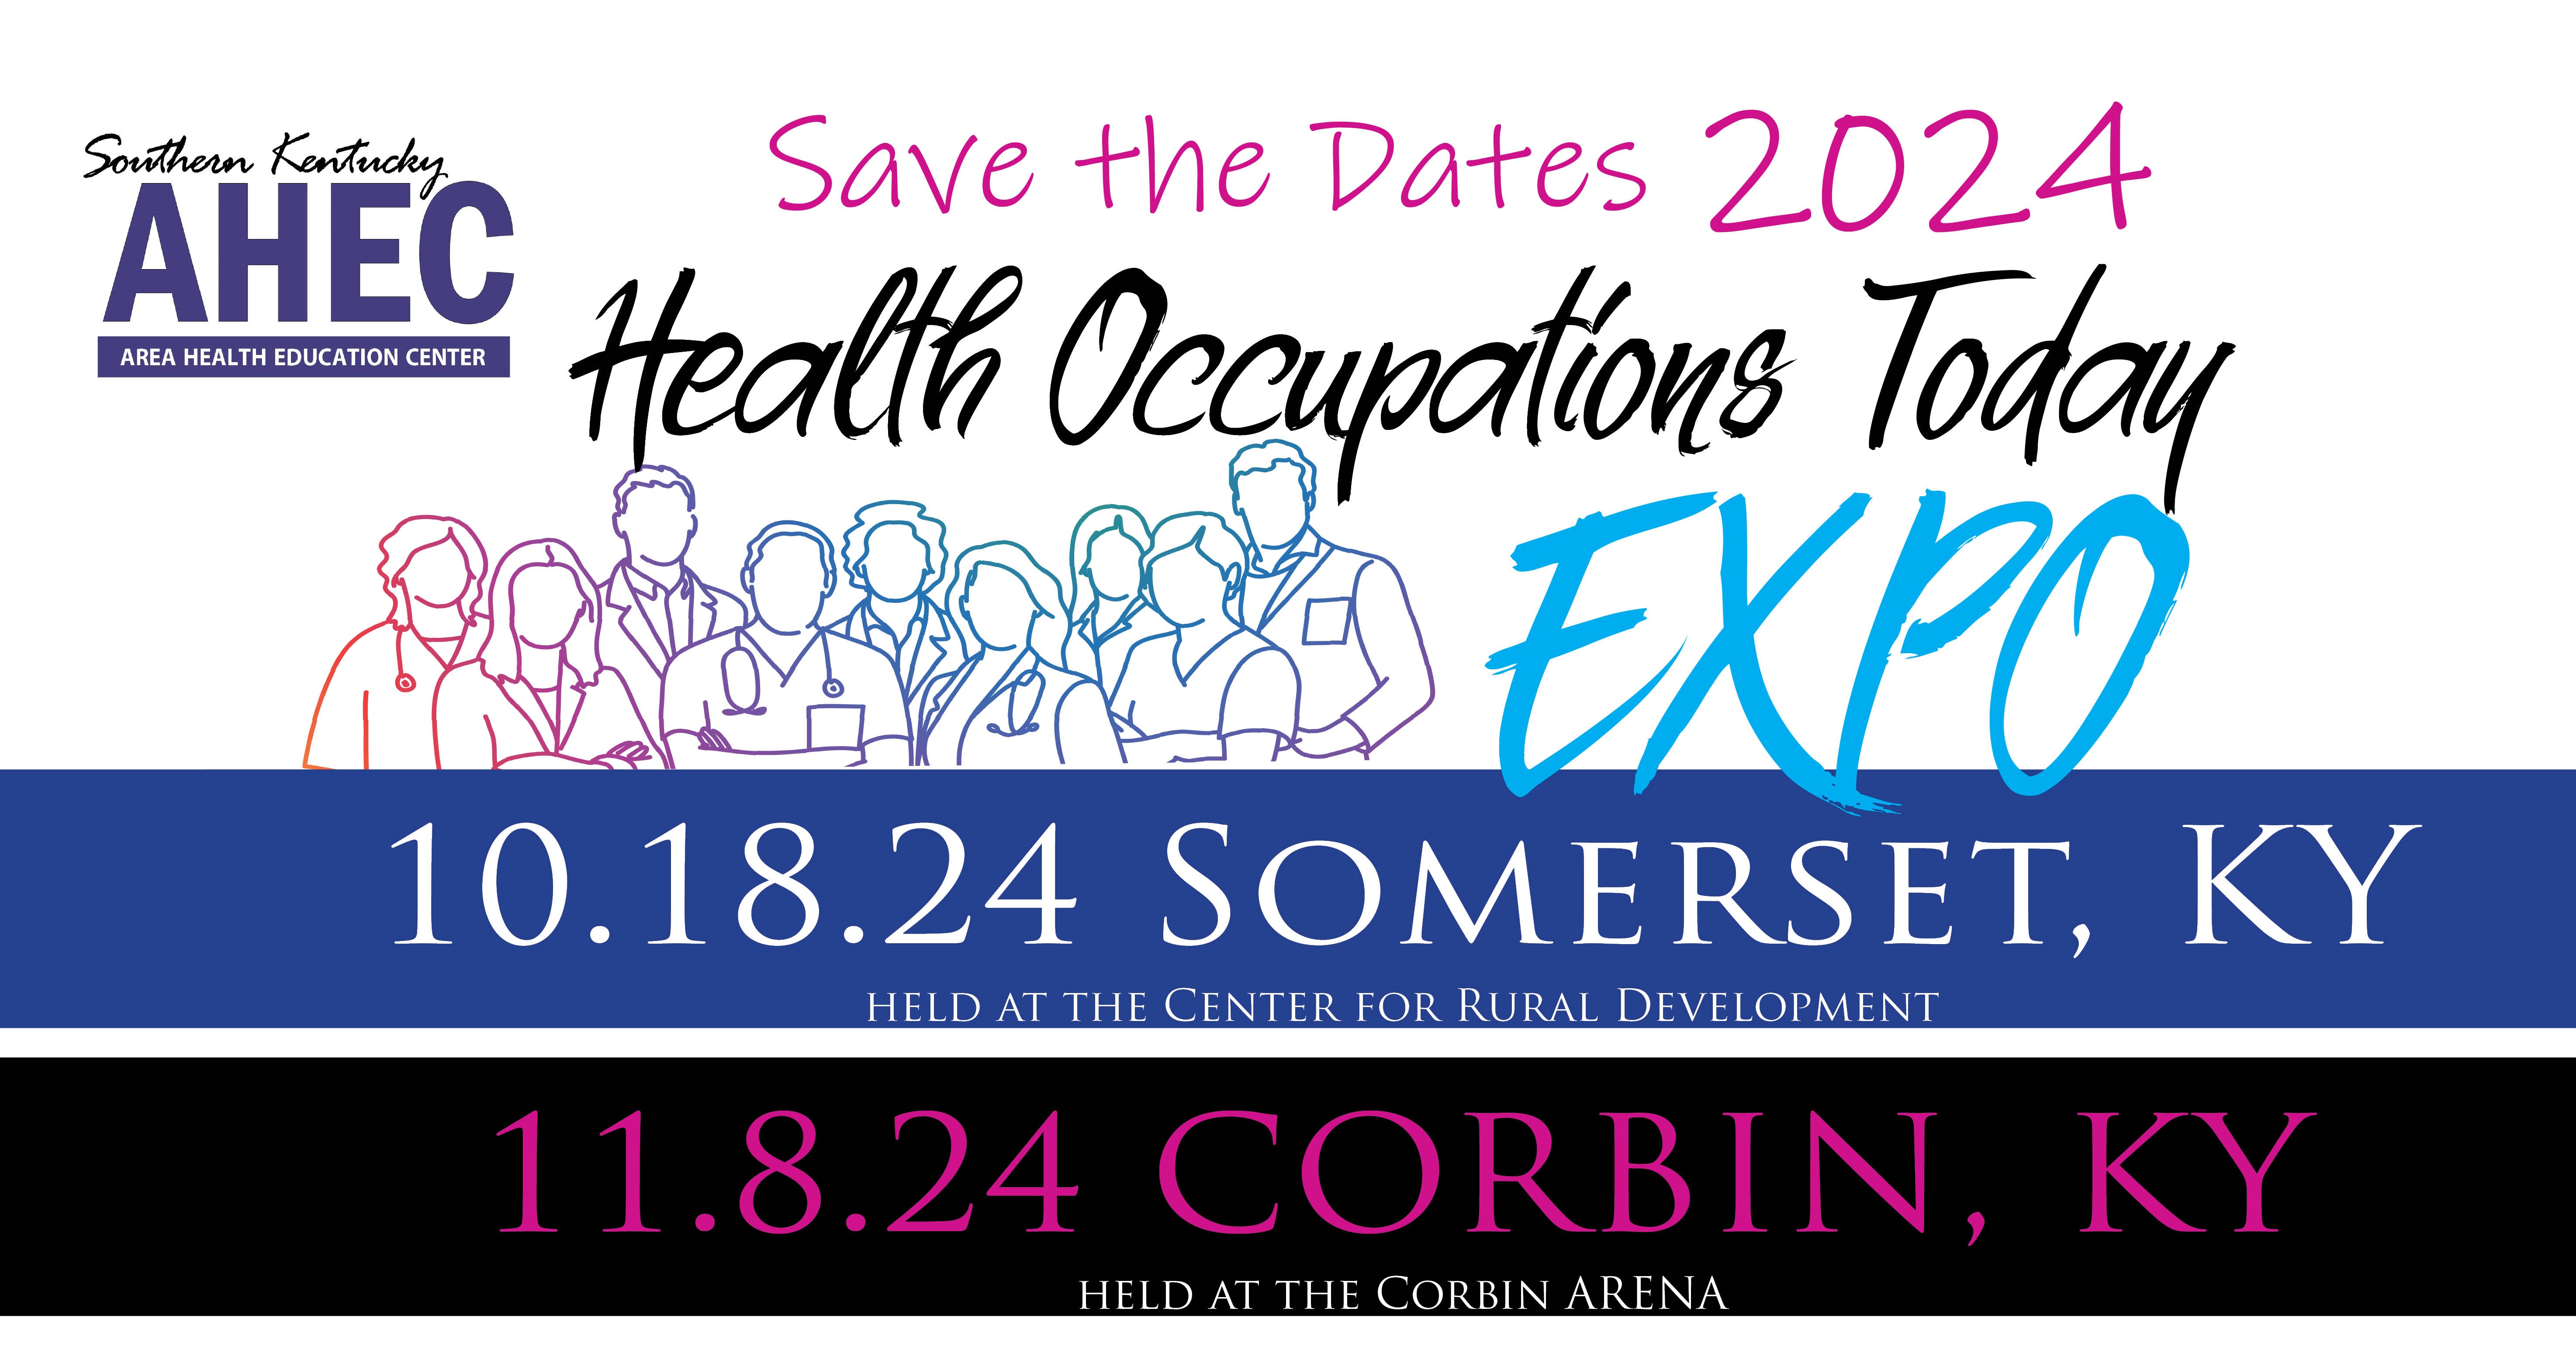 Save the dates 2024 HOT EXPO